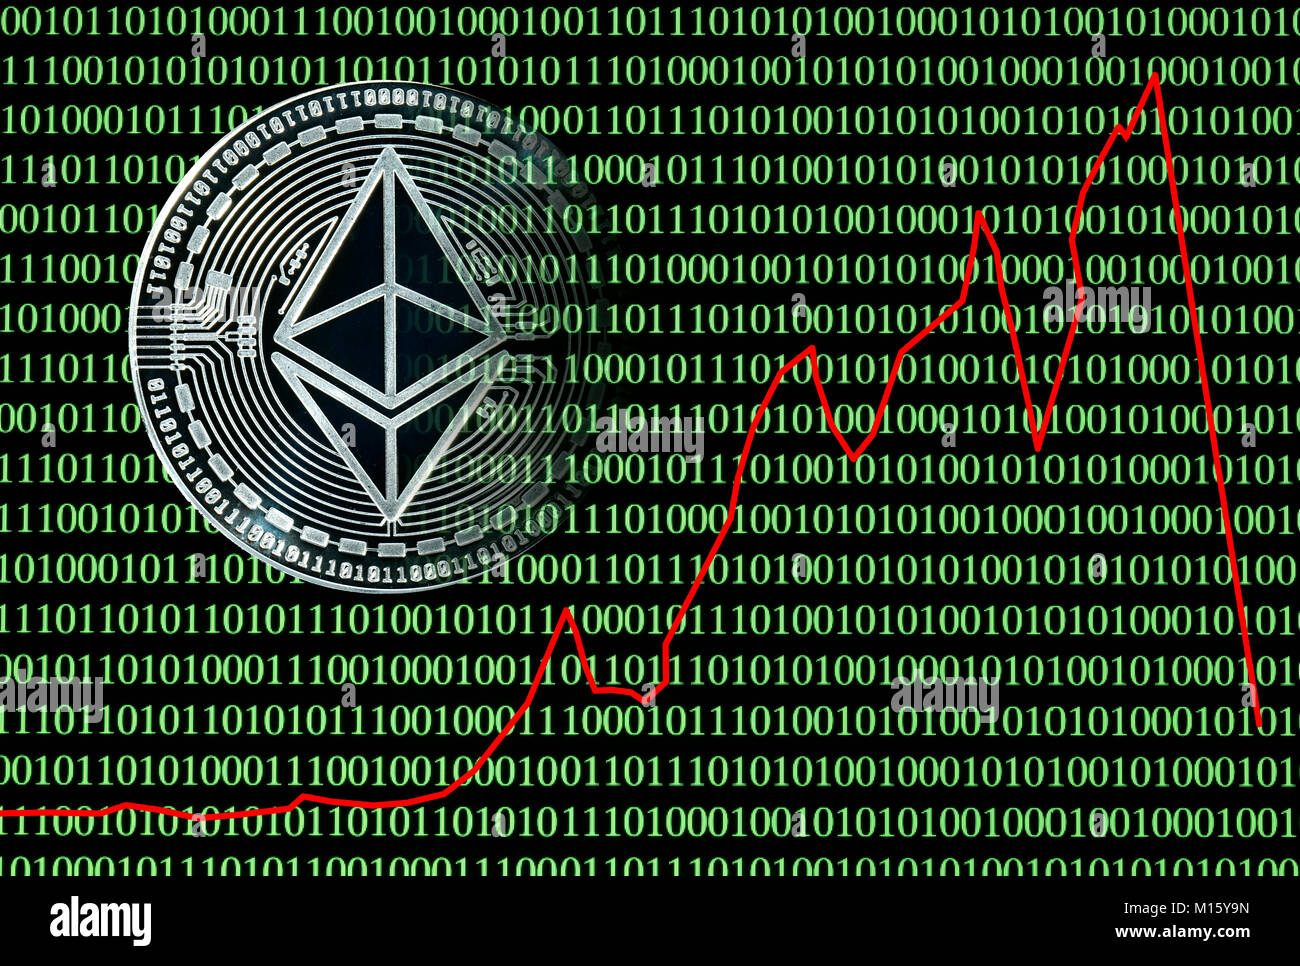 Symbol picture Cryptocurrency,digital currency,silver coin Ethereum in front of digital binary code with stock price Stock Photo